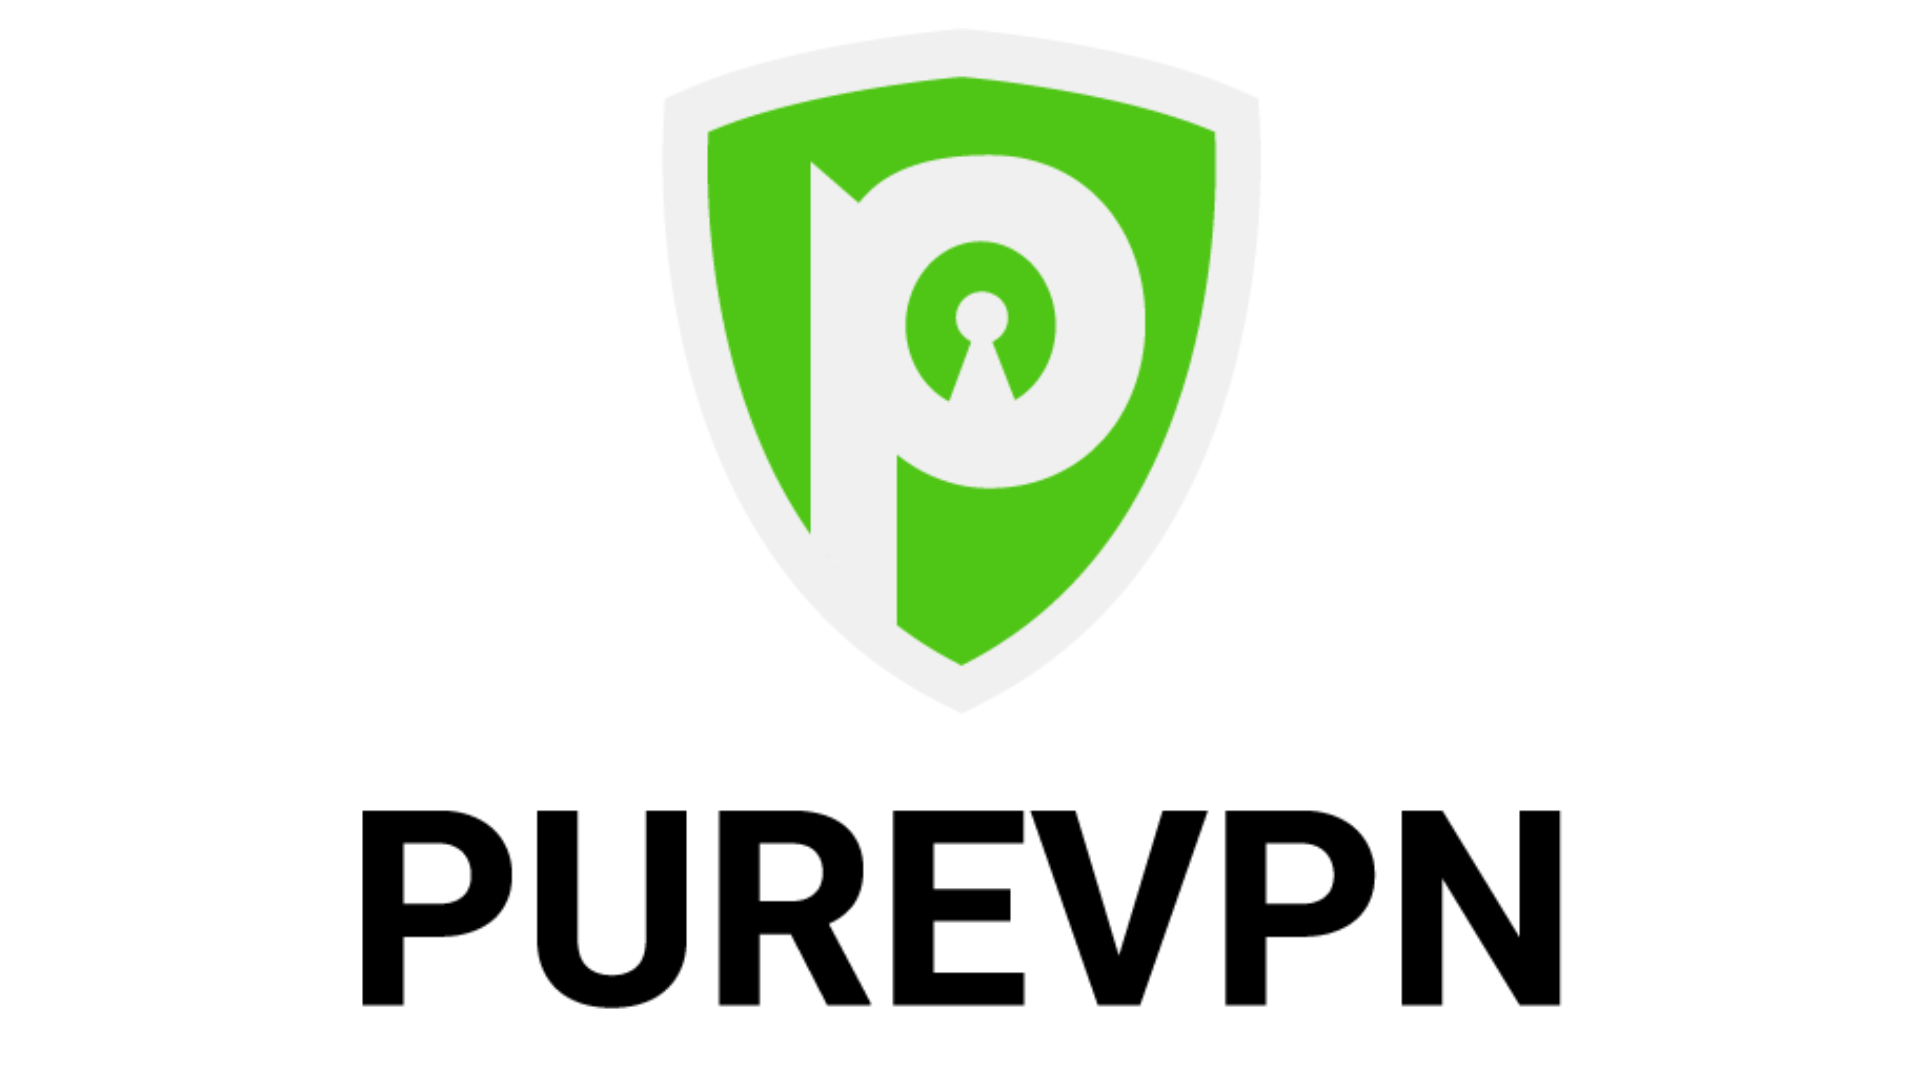 Best Firefox VPN: PureVPN.  The image shows the company logo.